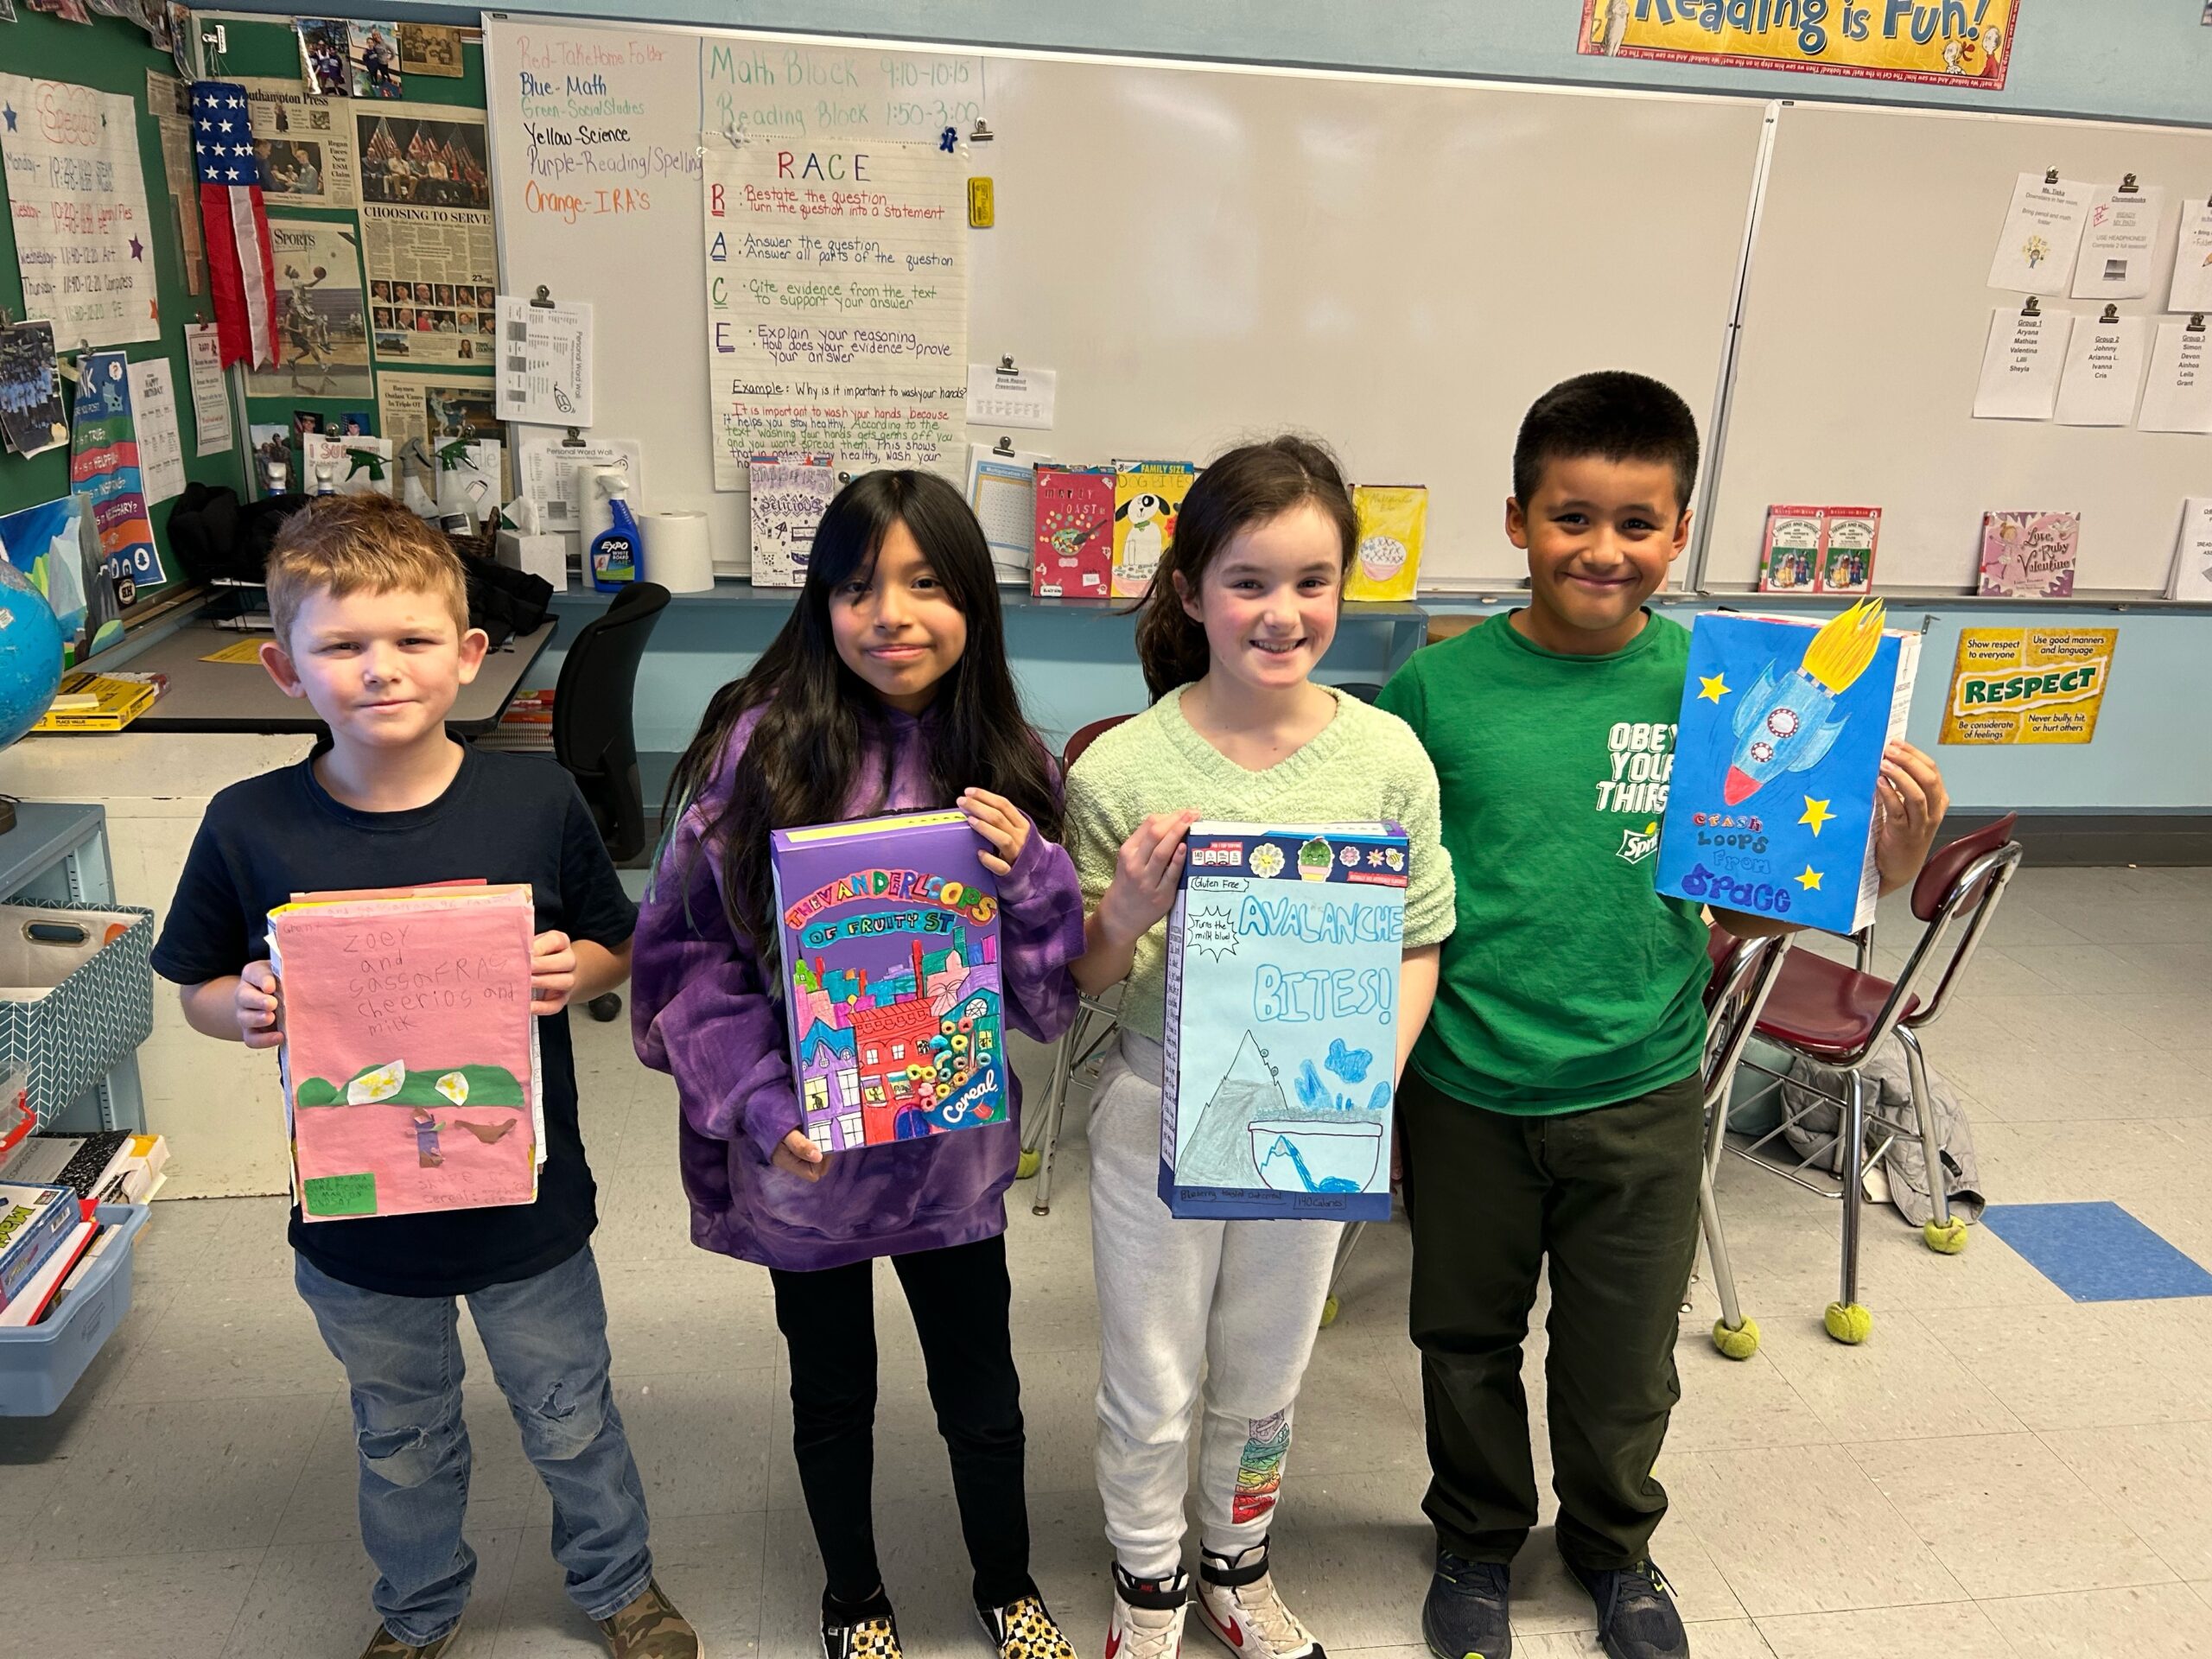 Hampton Bays Elementary School fourth grade students in Amy McNamara’s class recently created cereal box book reports as part of their fiction reading series. Each student came up with a unique name for their cereal based on the book they read, and all students presented their reports to the class. From left, Grant Kurz, Nicole Moranchel, Lilli Carlson and Simon O'Campo with their project. COURTESY HAMPTON BAYS SCHOOL DISTRICT